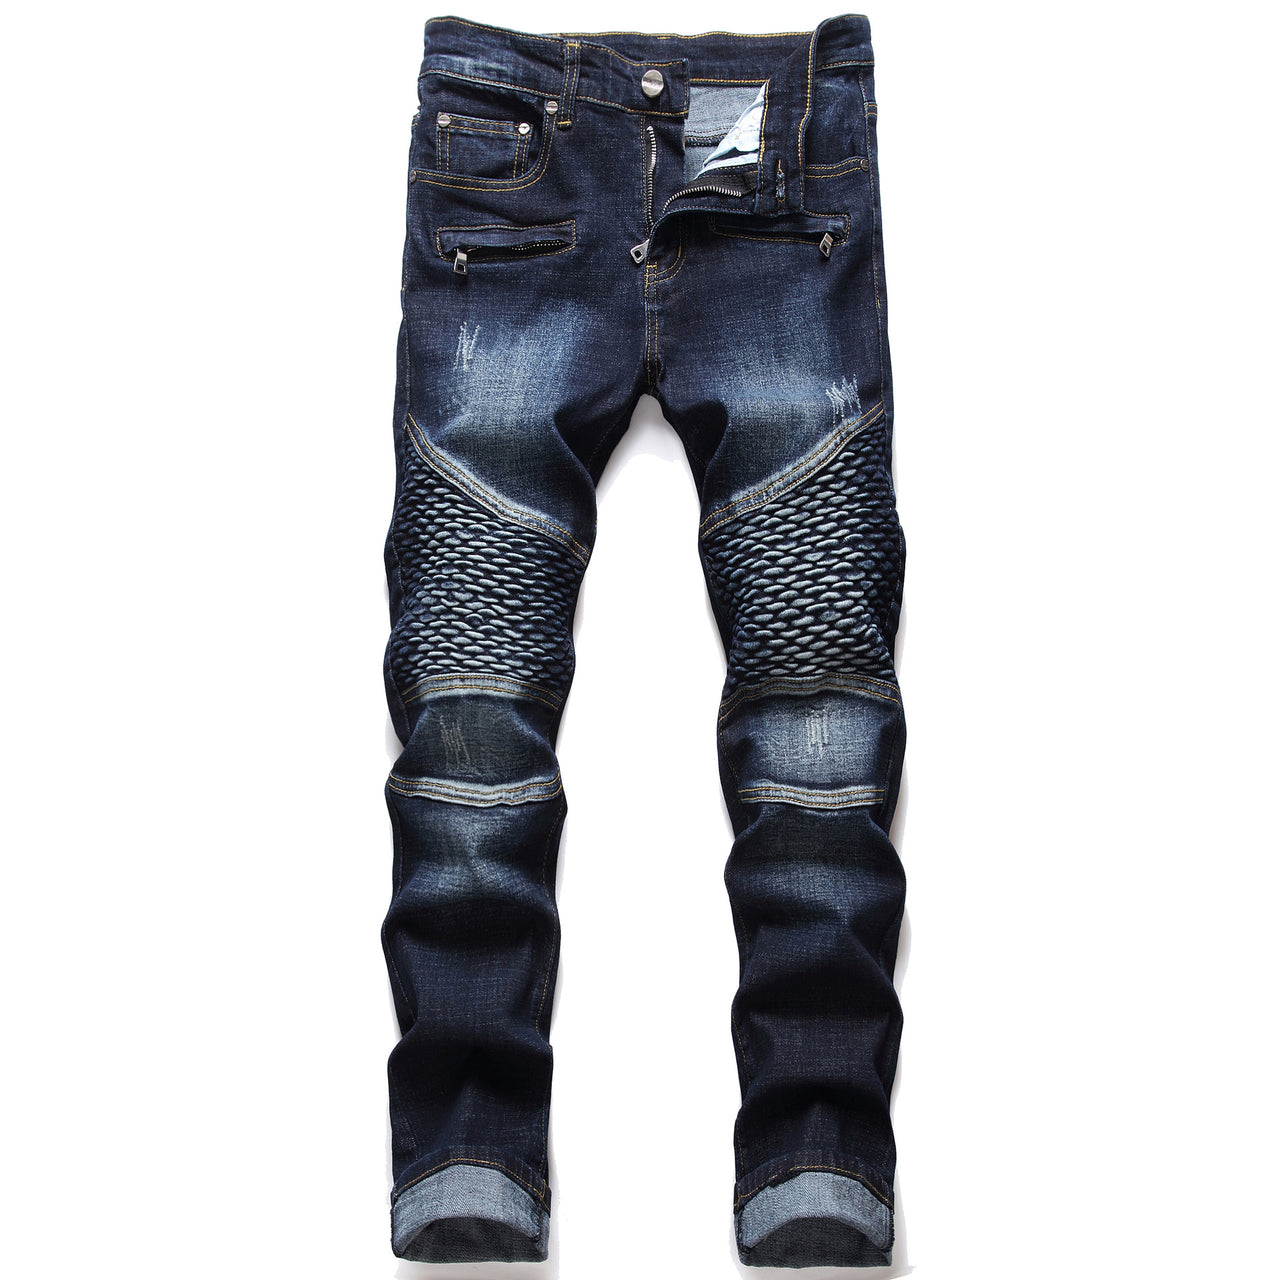 Men's Motorcycle Pleated Slim Stretch Jeans